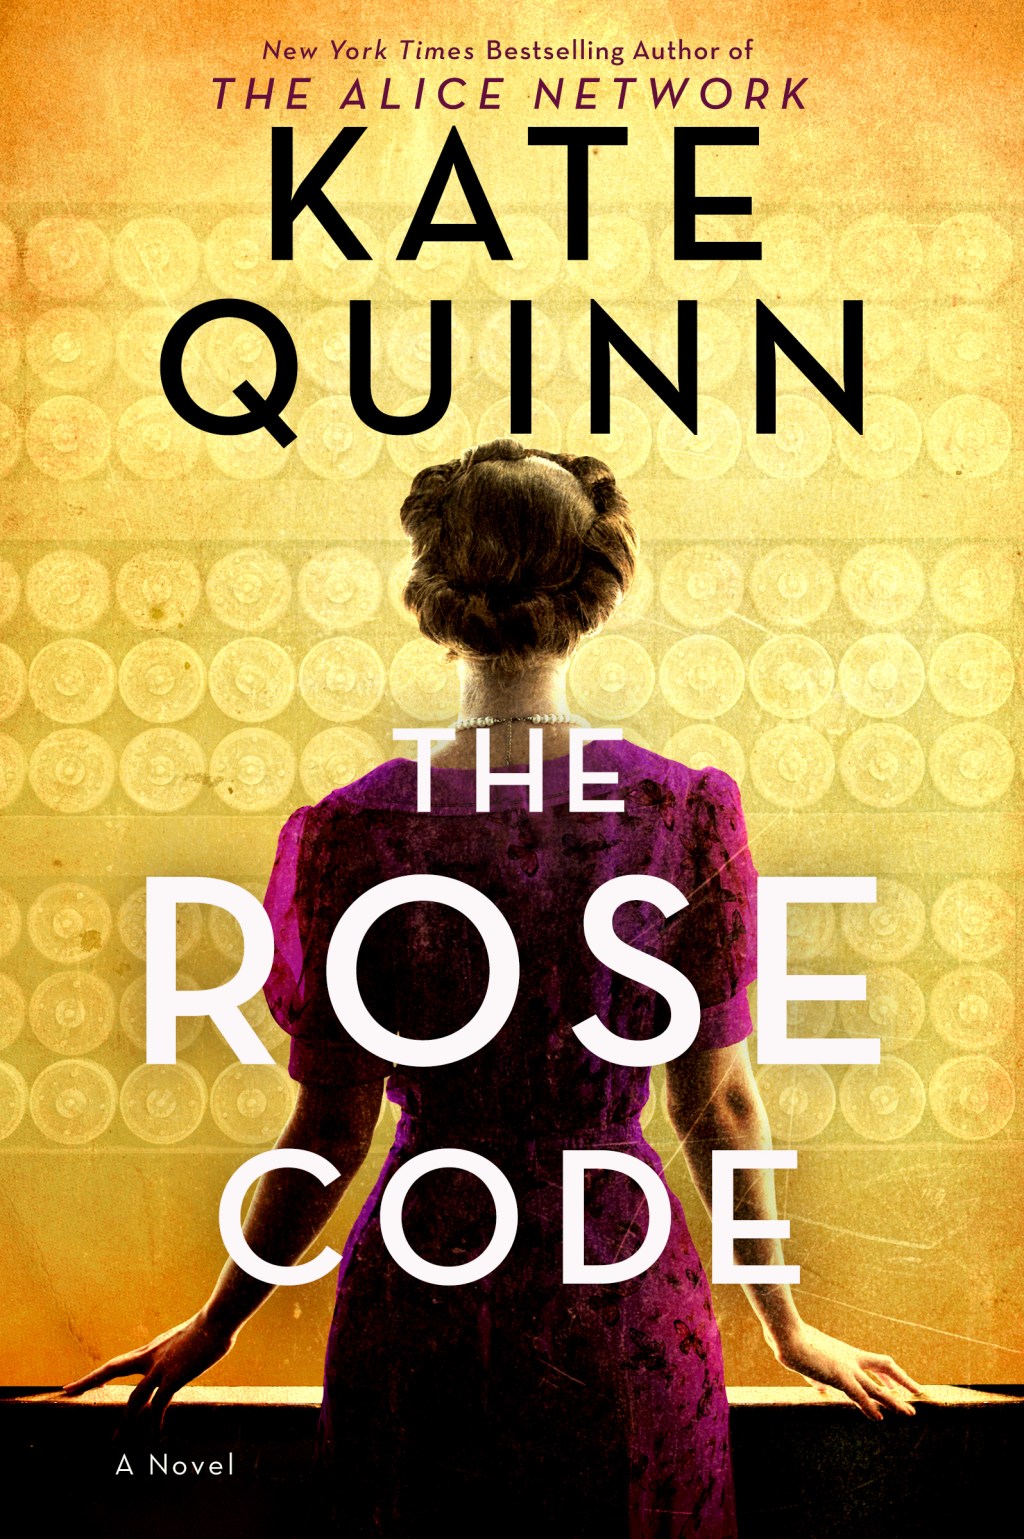 Mab in The Rose Code by Kate Quinn